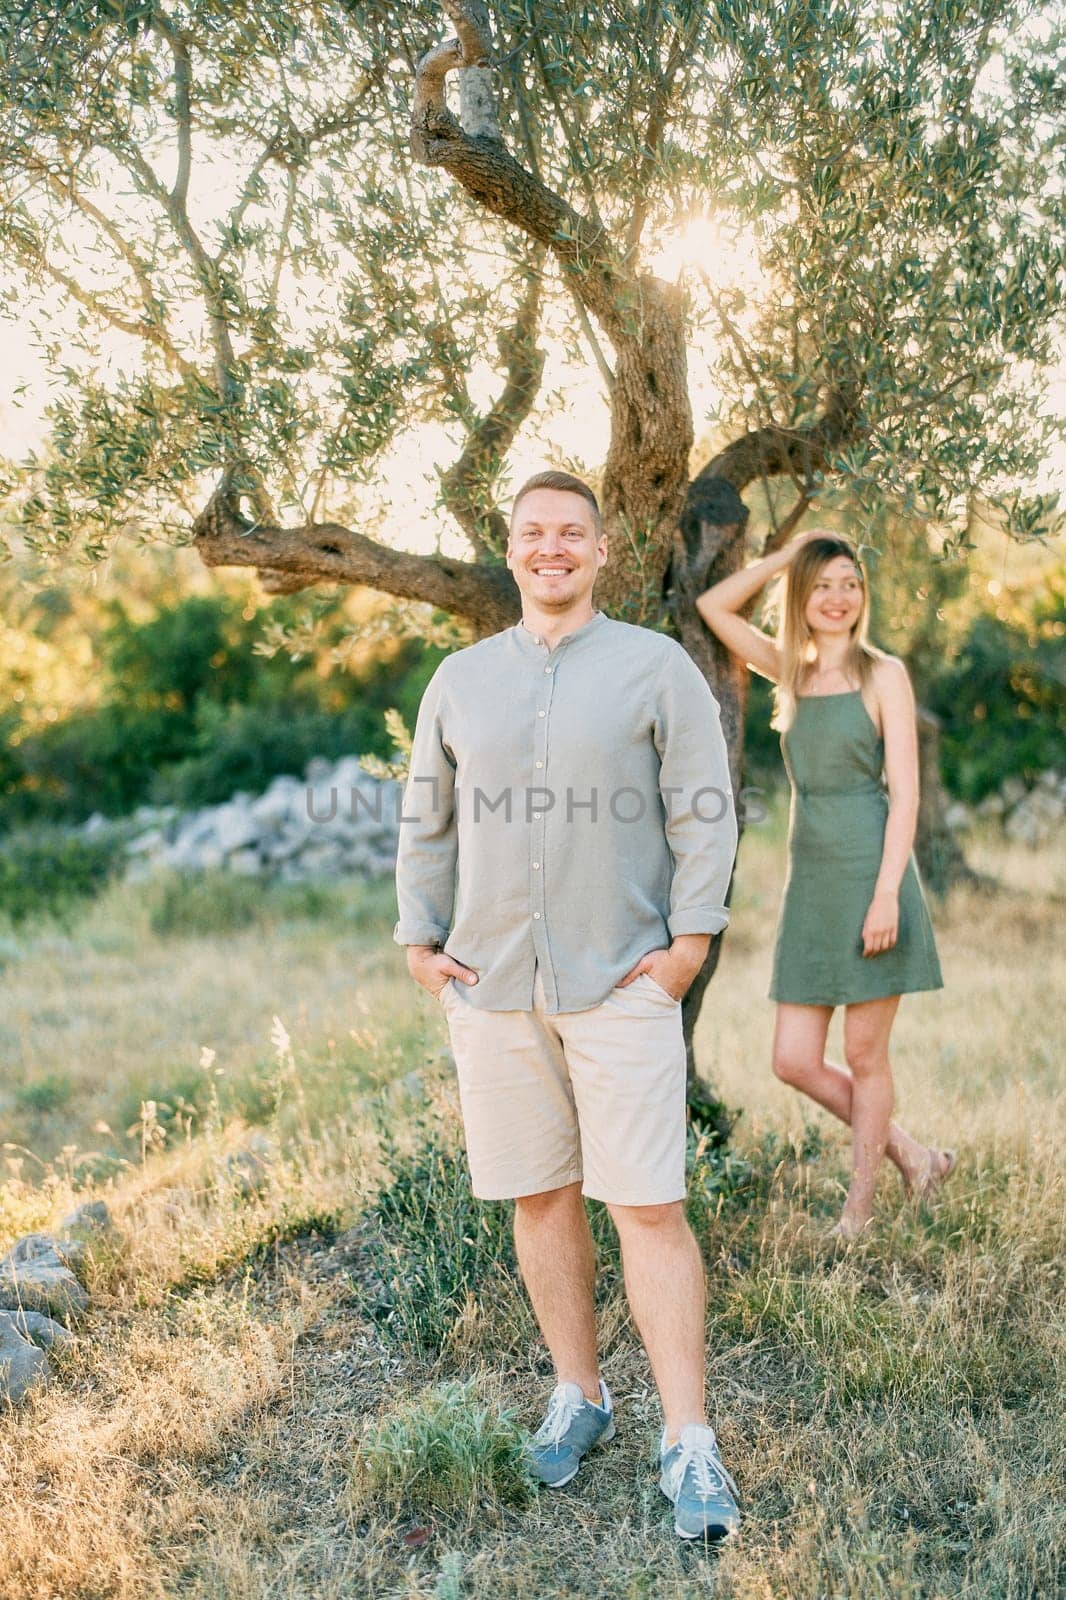 Girl stands leaning her elbow on a tree behind smiling guy with his hands in his pockets by Nadtochiy